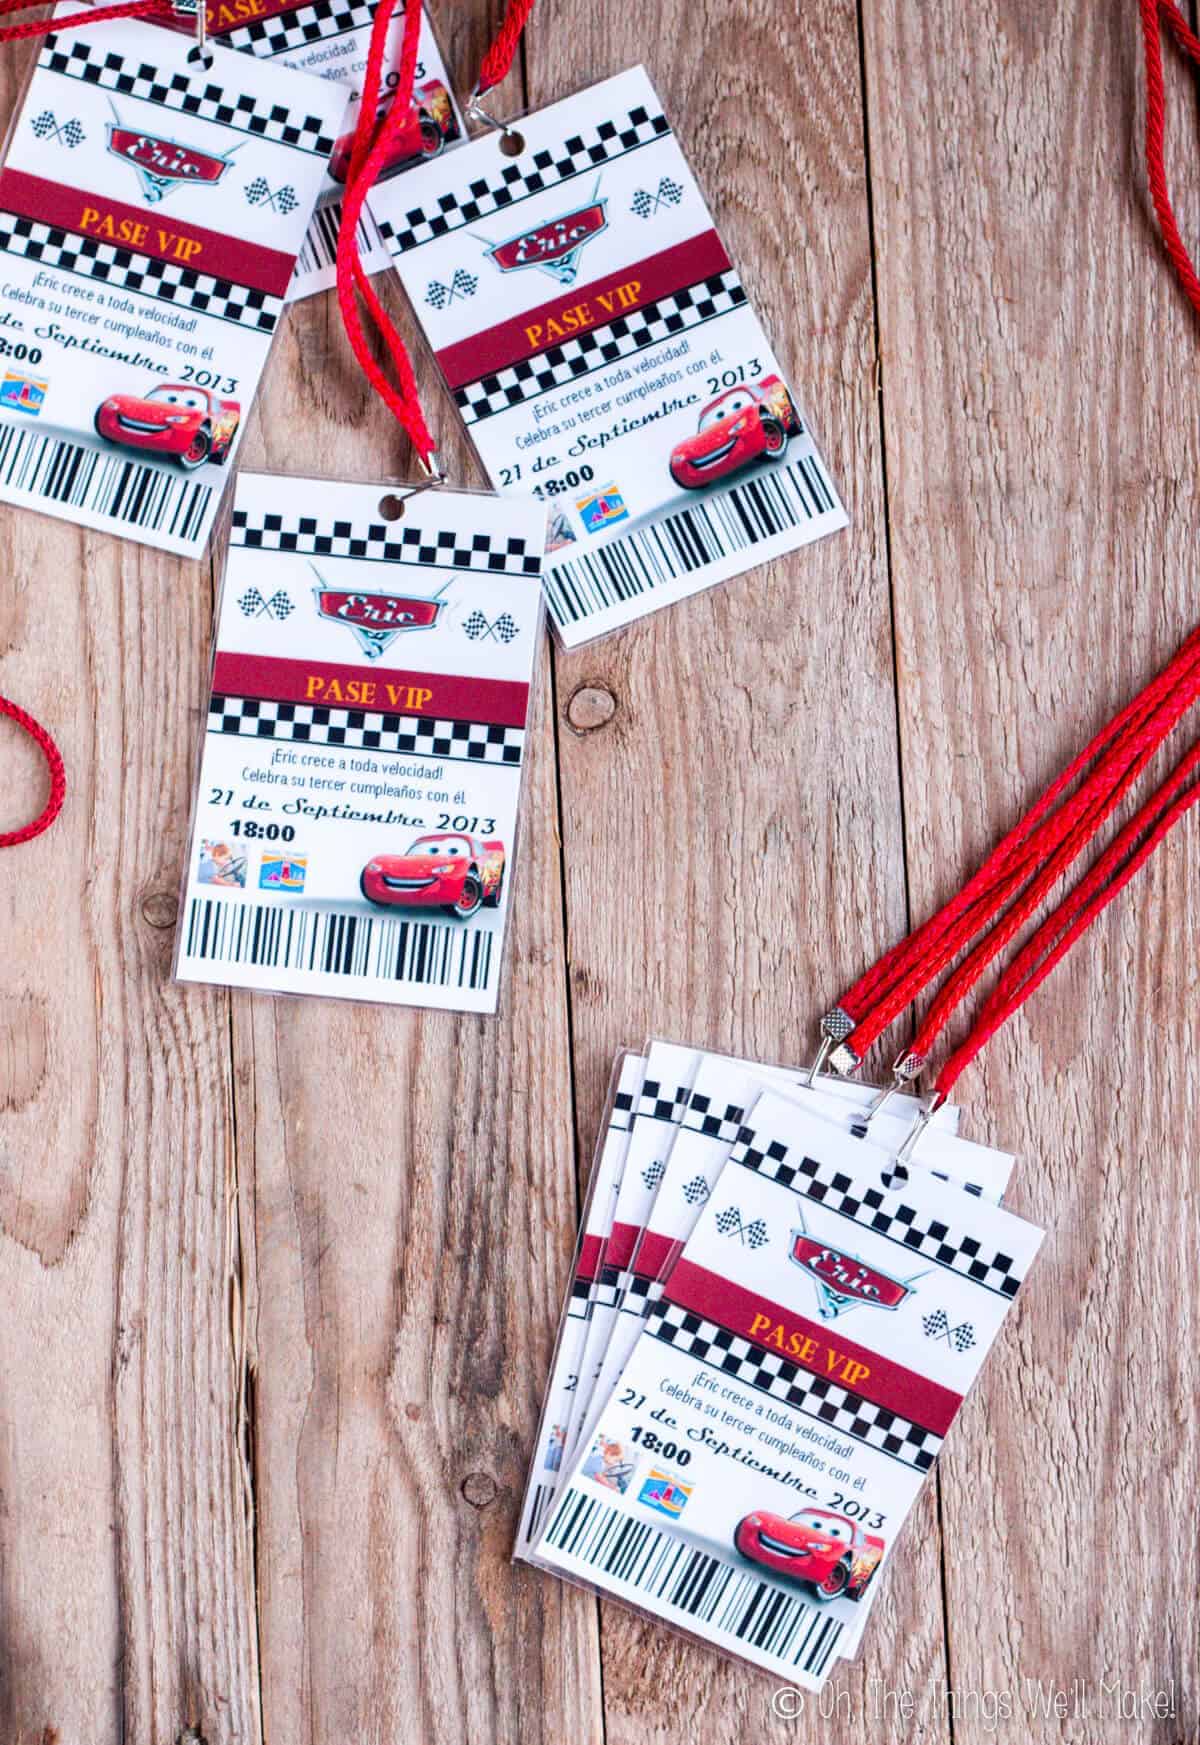 Several Cars themed invitations that look like pit passes on red lanyards.